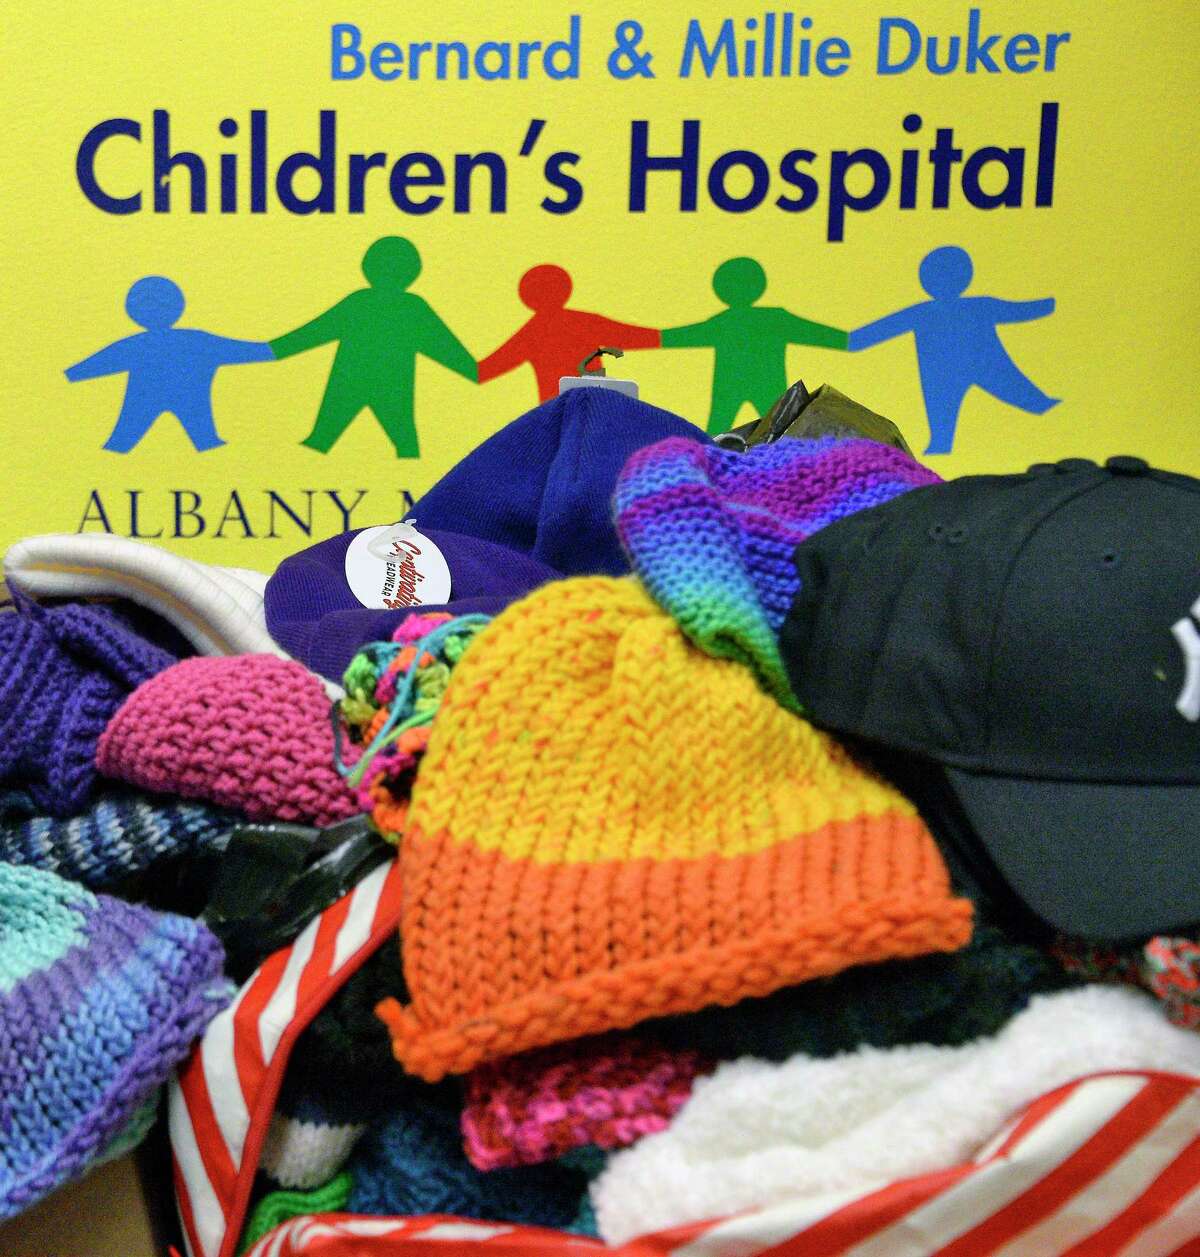 Just some of the 900 hats collected by Jeremy Wernick, 15, of Latham for patients at the Bernard & Millie Duker ChildrenOs Hospital at Albany Medical Center Wednesday Dec. 12, 2018 in Albany, NY. The hats were collected by Jeremy throughout the month of November, marking his sixth year of Hatsgiving, a project Jeremy started when he was 9 years old. (John Carl D'Annibale/Times Union)